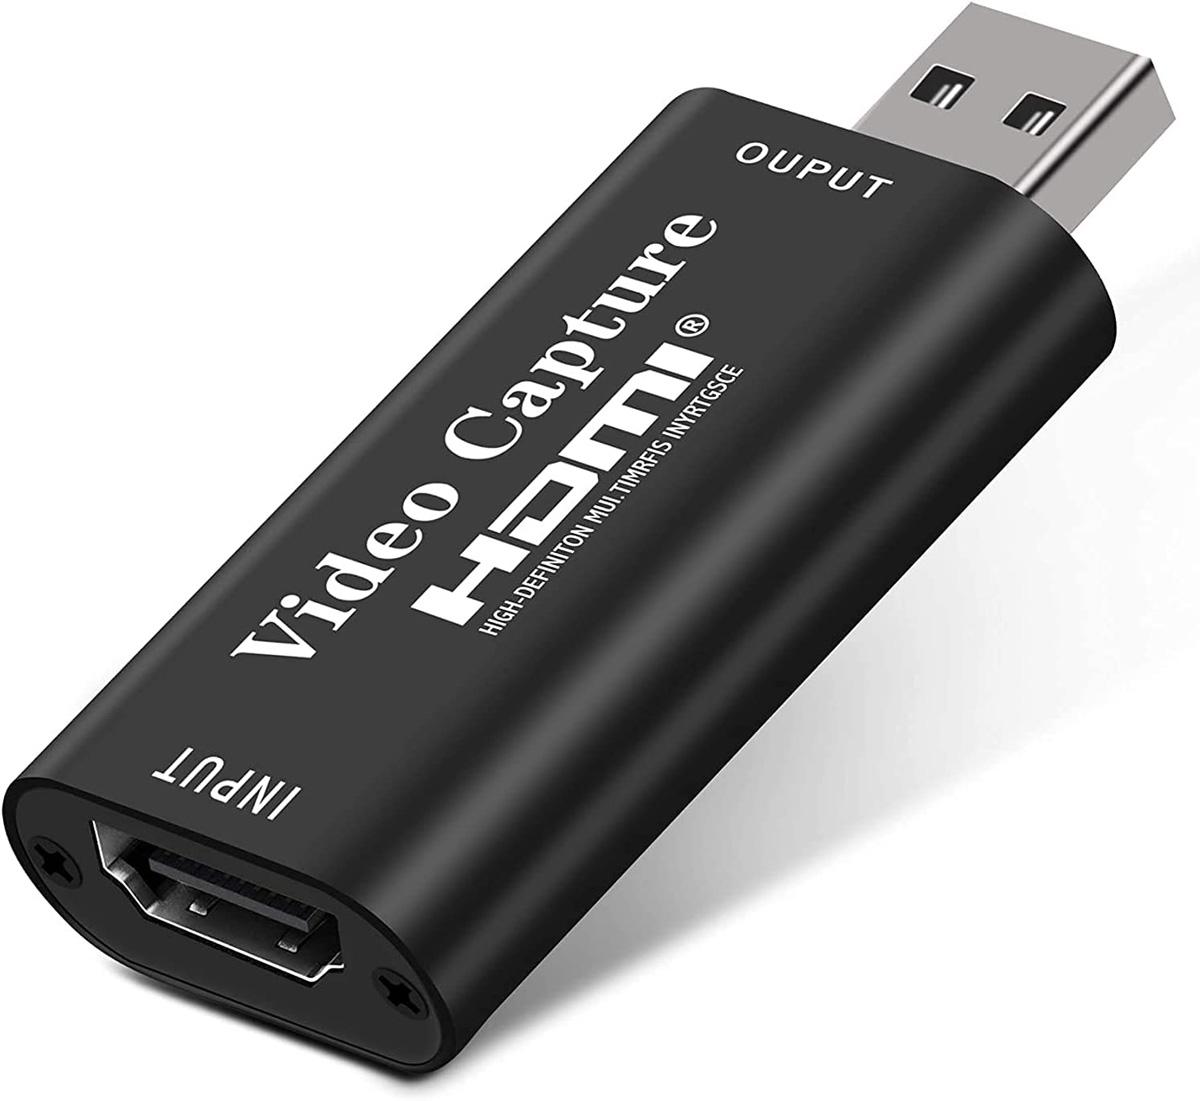 HDMI to 1080p USB Video Capture Card for $8.99